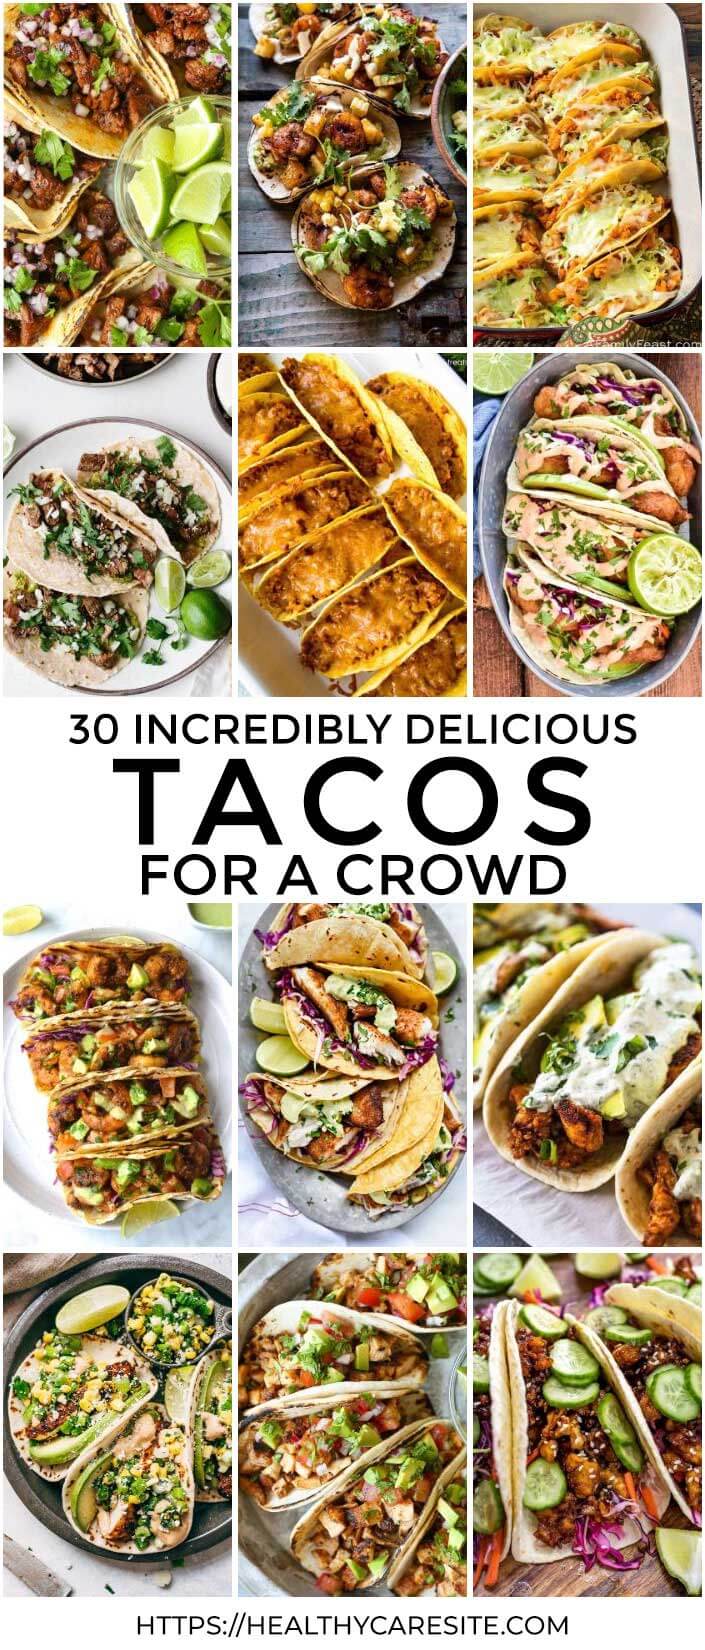 30 Incredibly Delicious Tacos For A Crowd